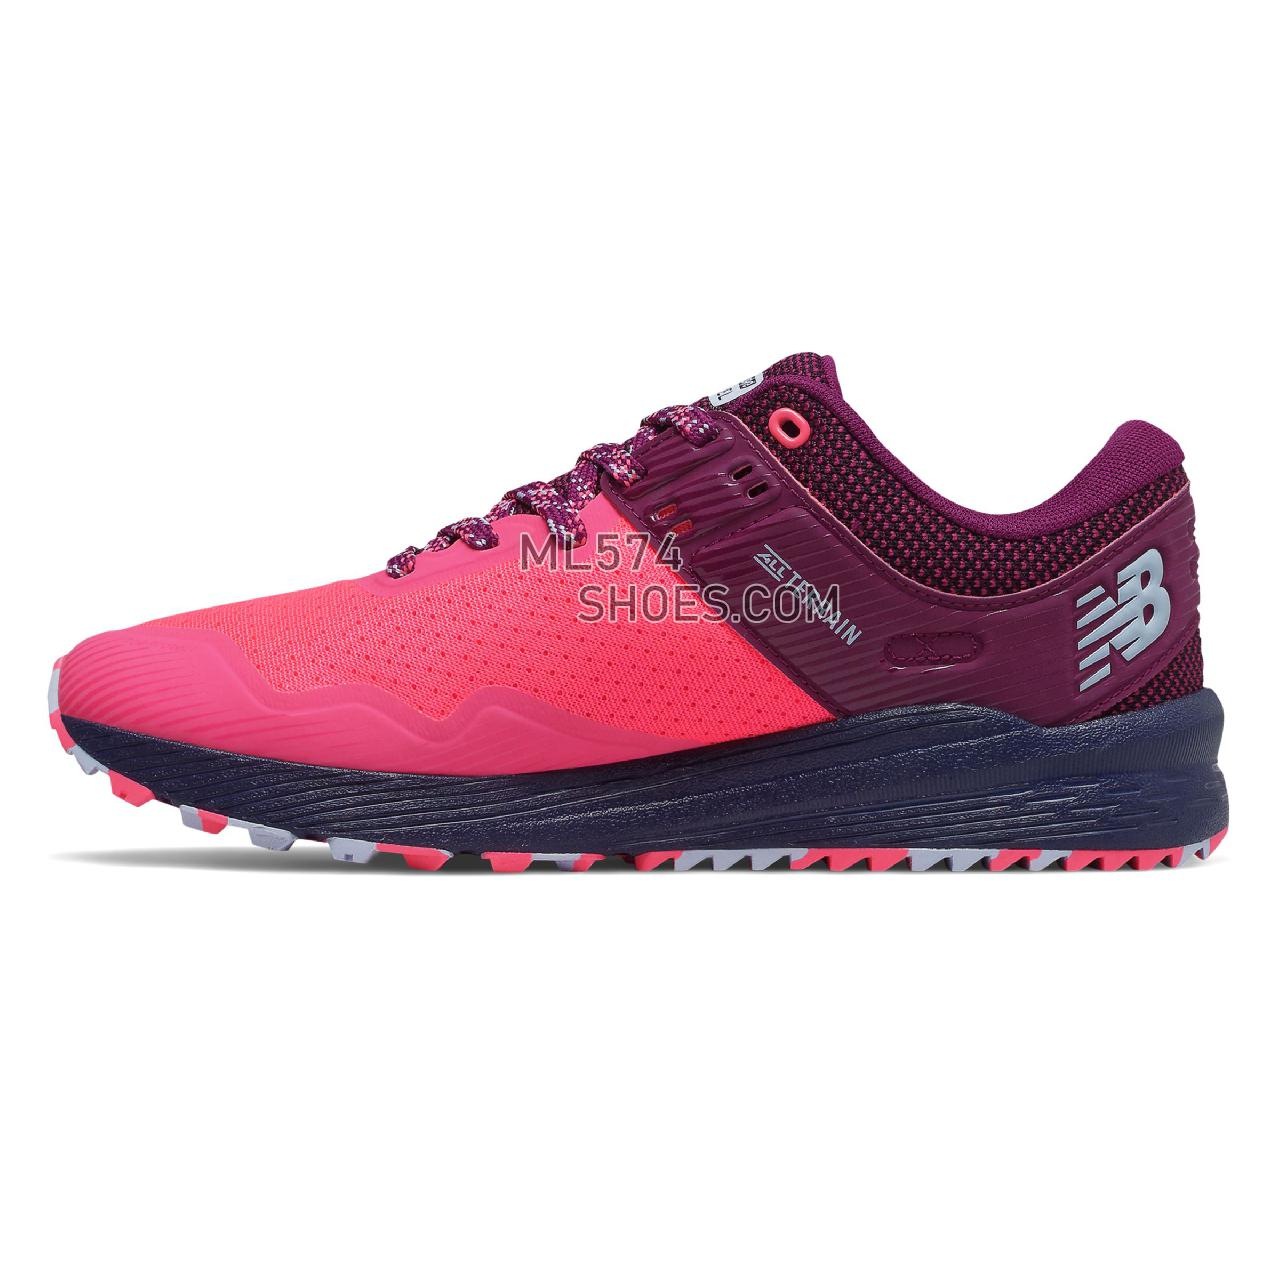 New Balance FuelCore NITREL v2 - Women's 2 - Running Pink Zing with Claret and Pigment - WTNTRLP2